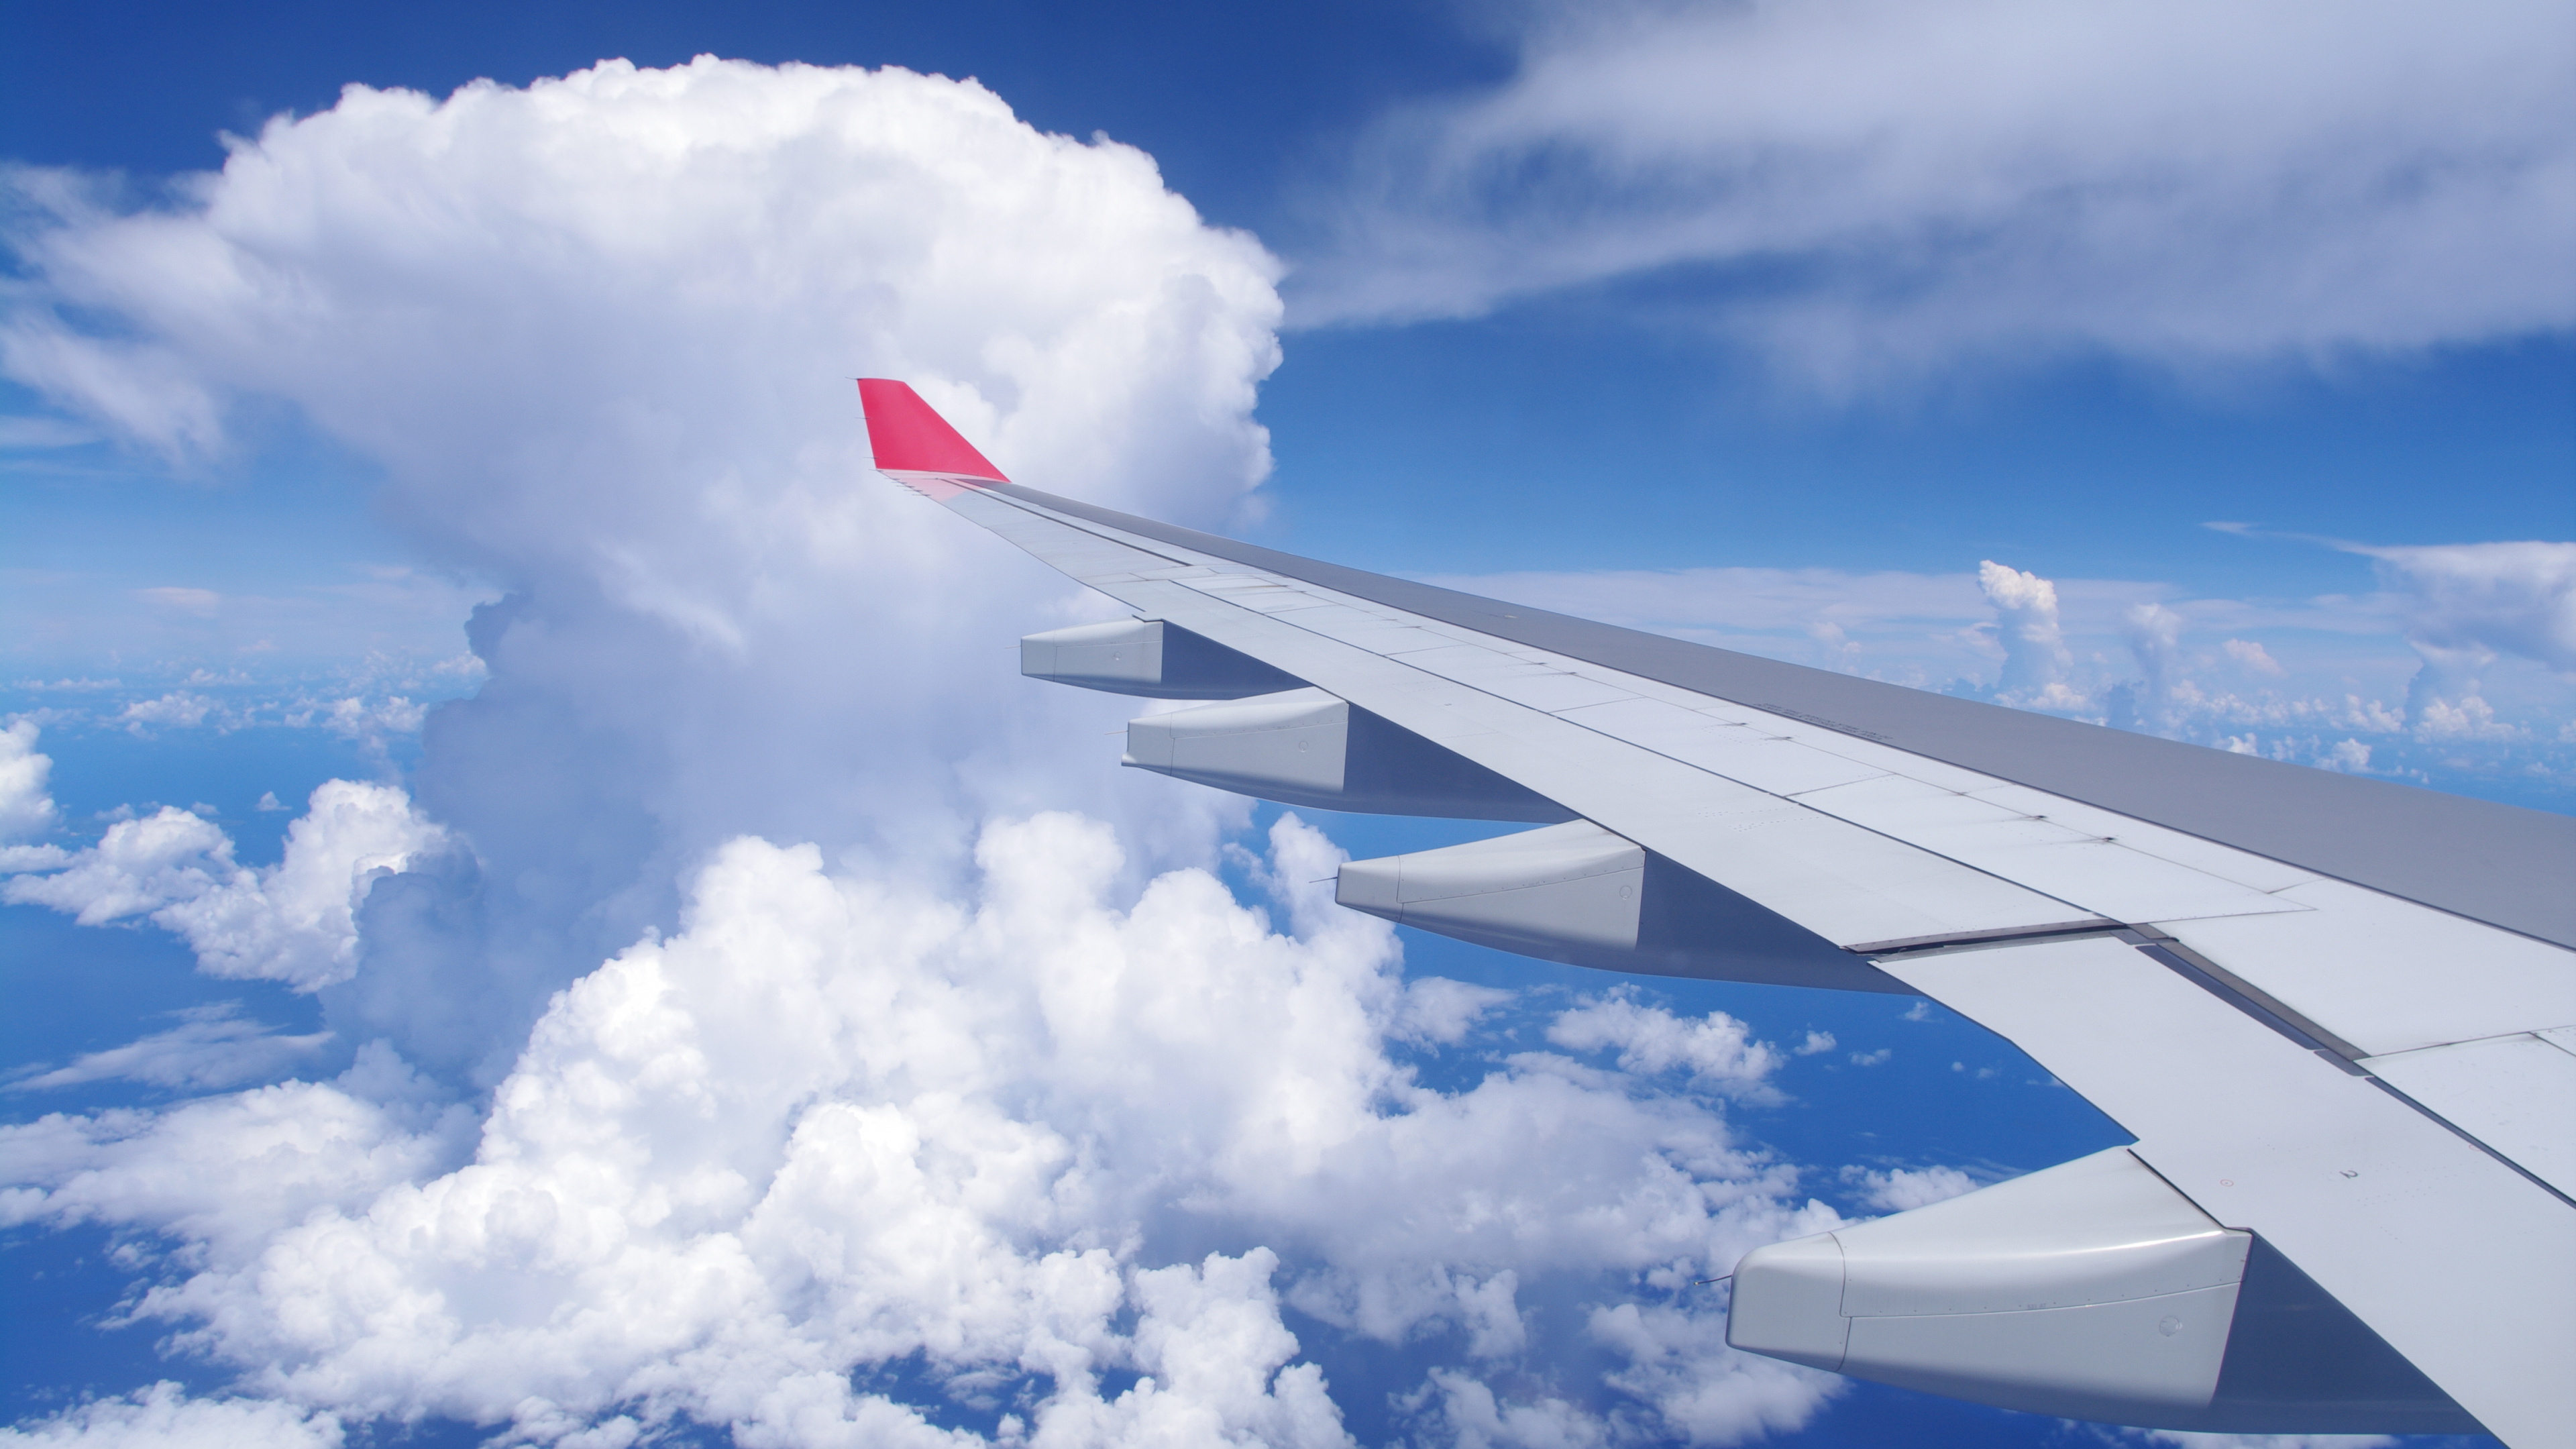 White and Red Airplane Wing Under Blue Sky and White Clouds During Daytime. Wallpaper in 3840x2160 Resolution